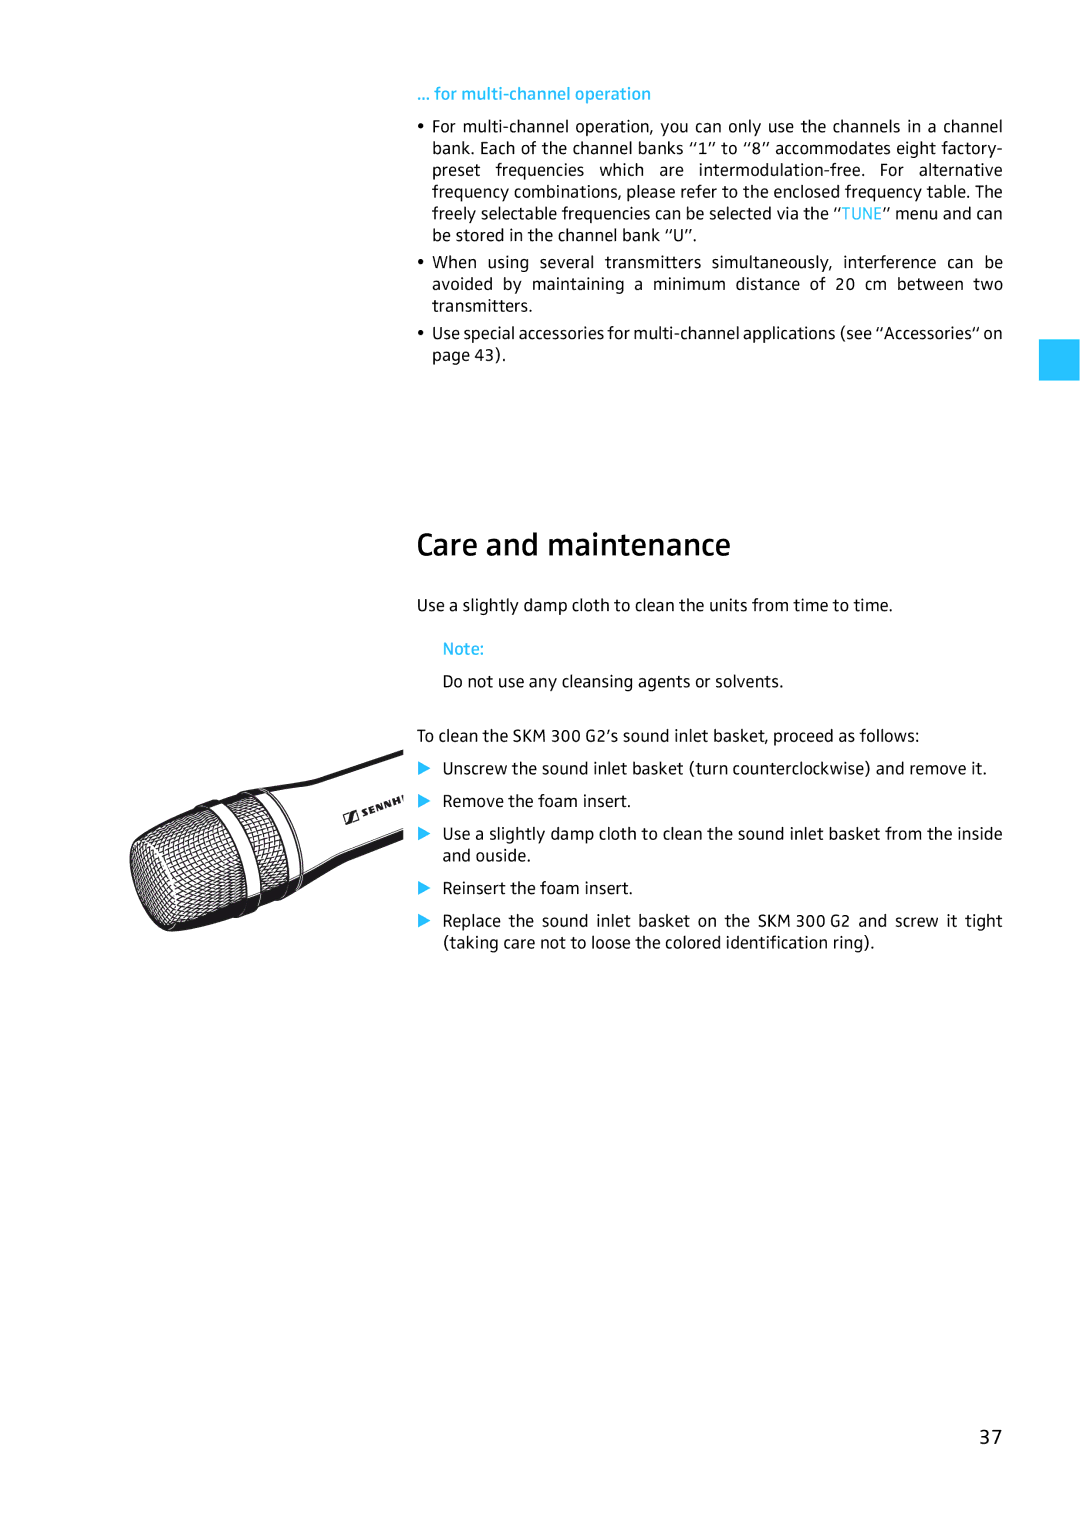 Sennheiser EW 300 G2 manual Care and maintenance, For multi-channel operation 